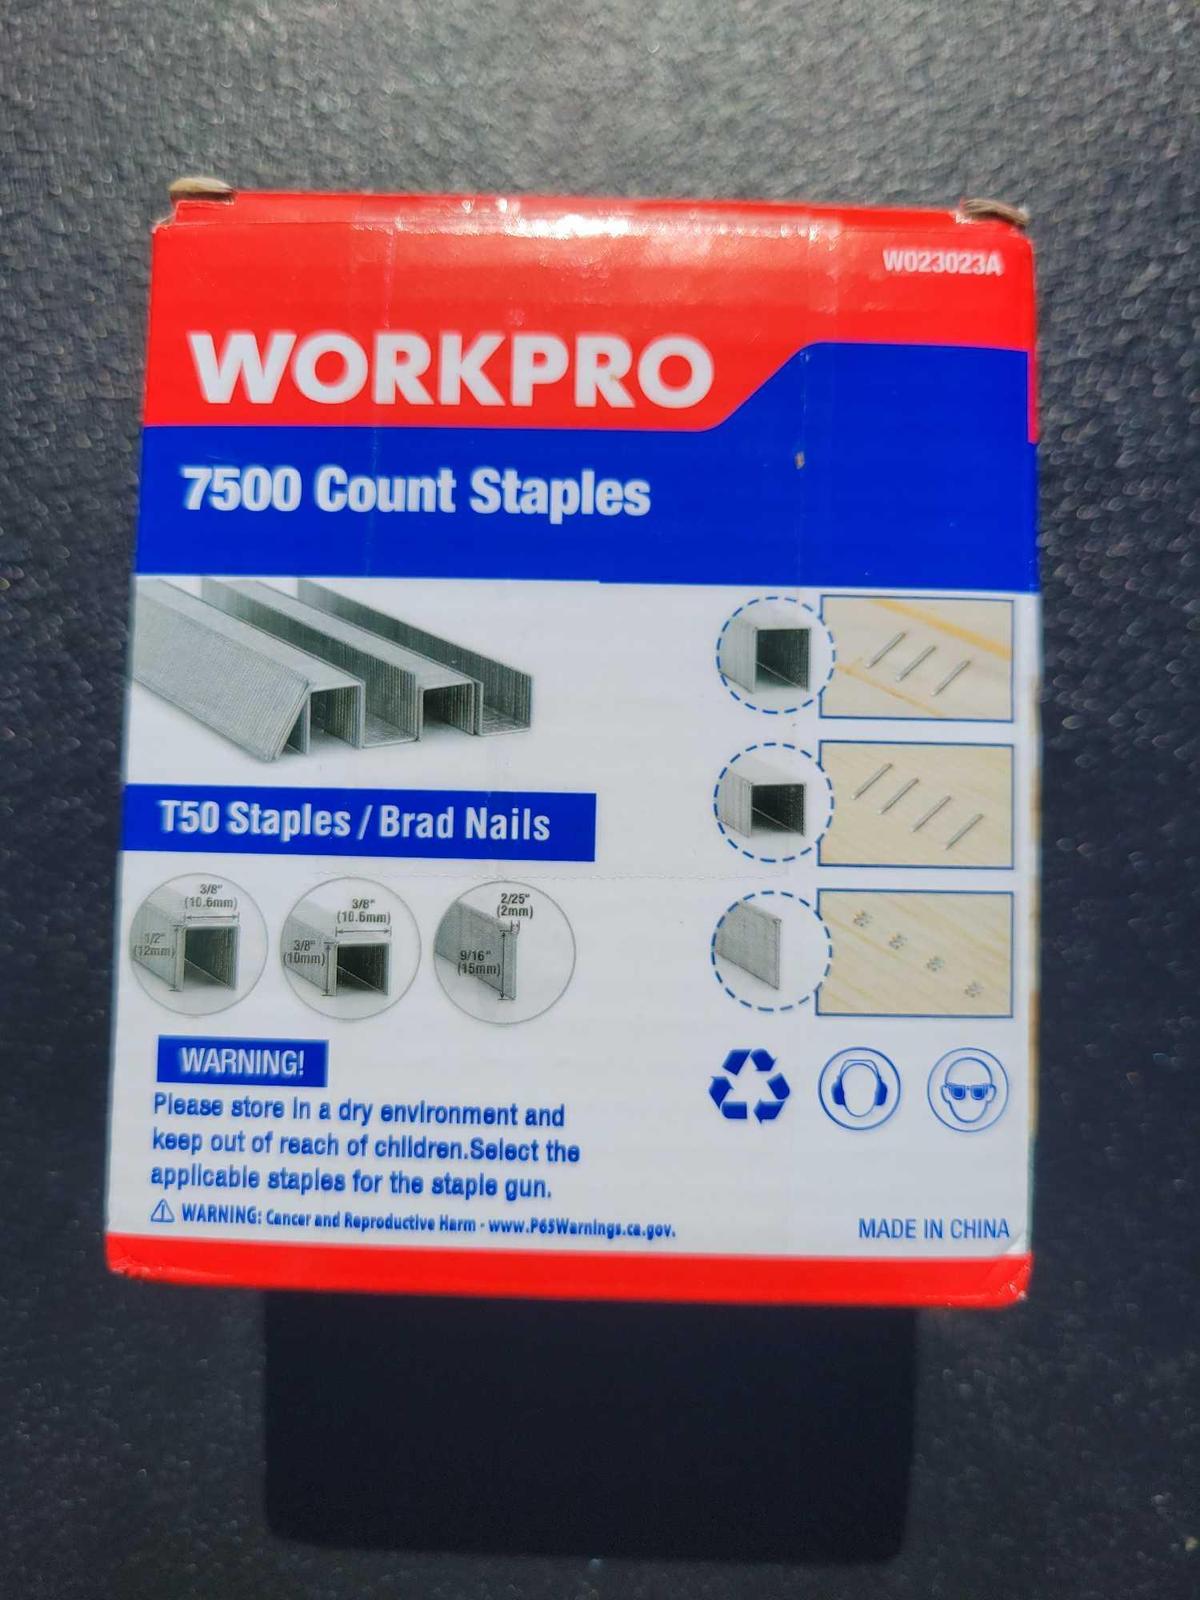 Staples $1 STS